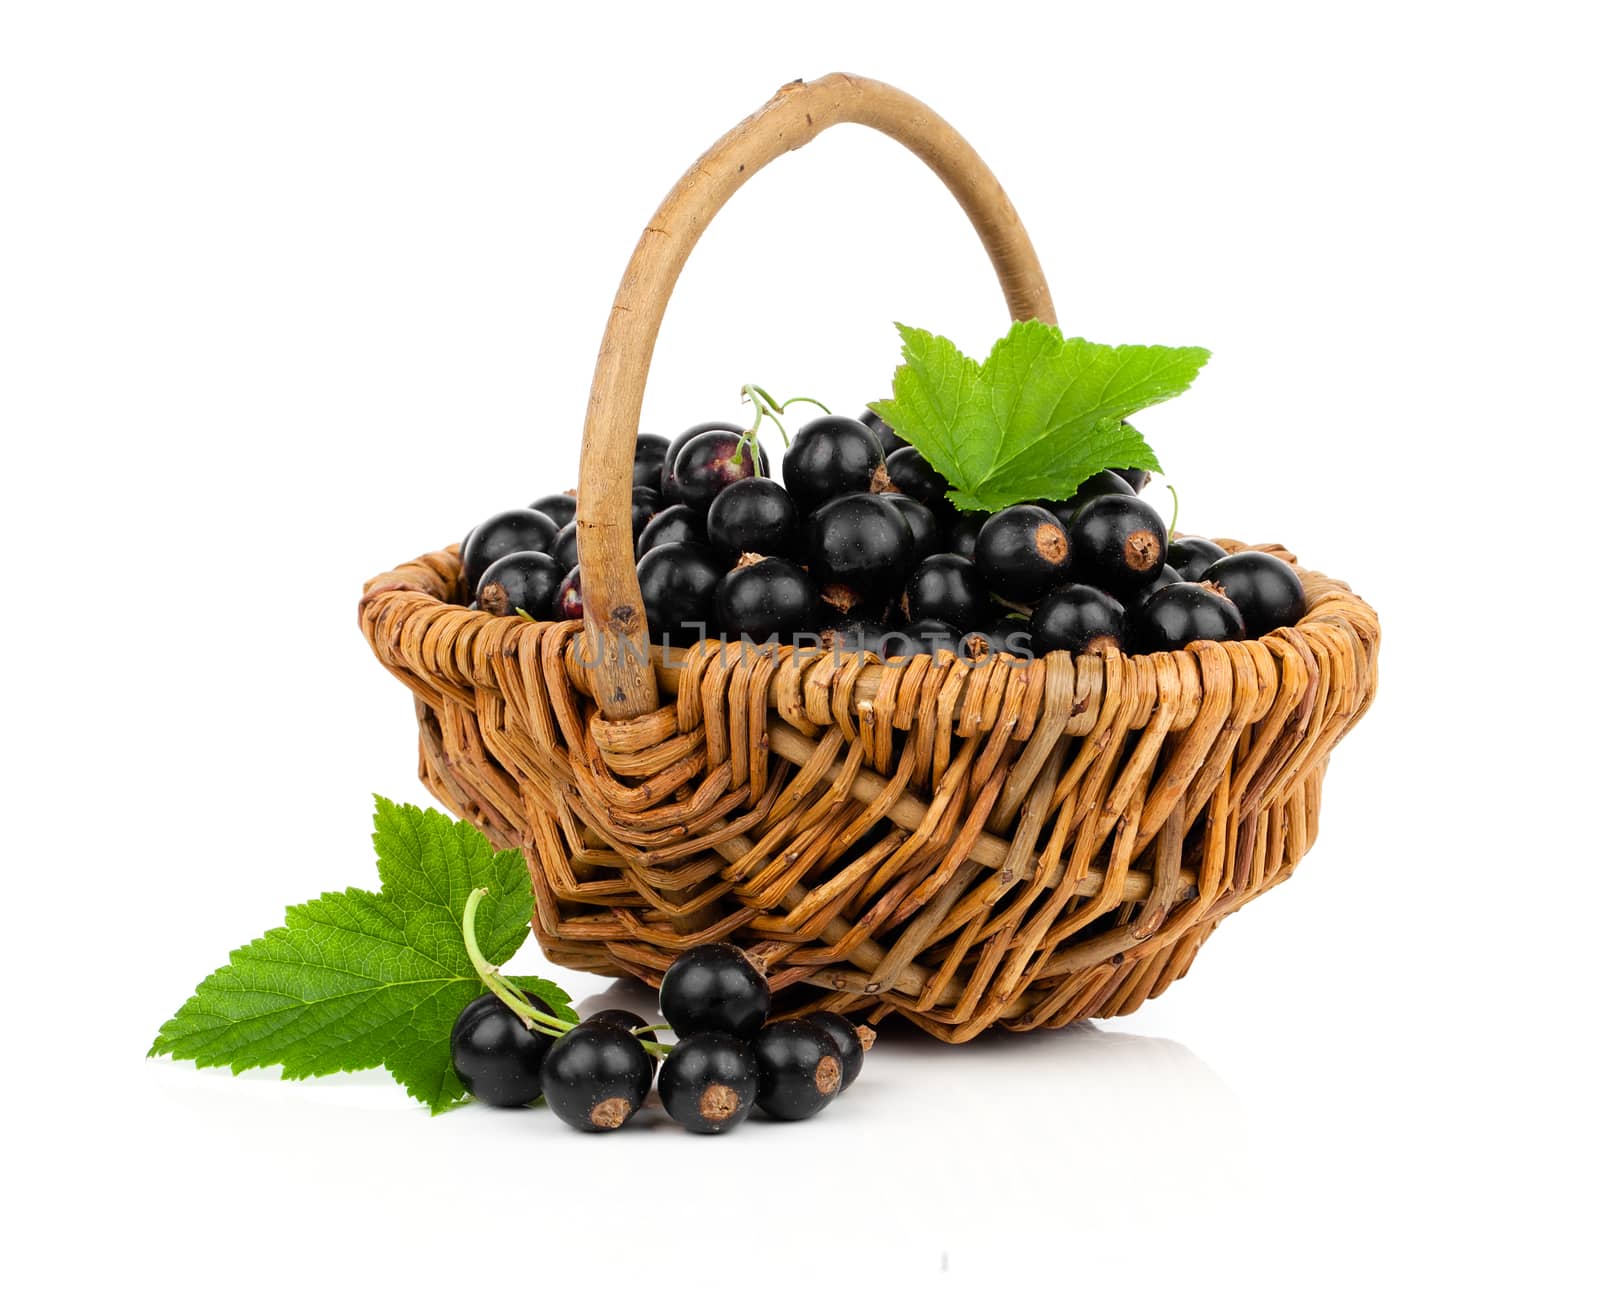 black currant in a wicker basket, on a white background by motorolka